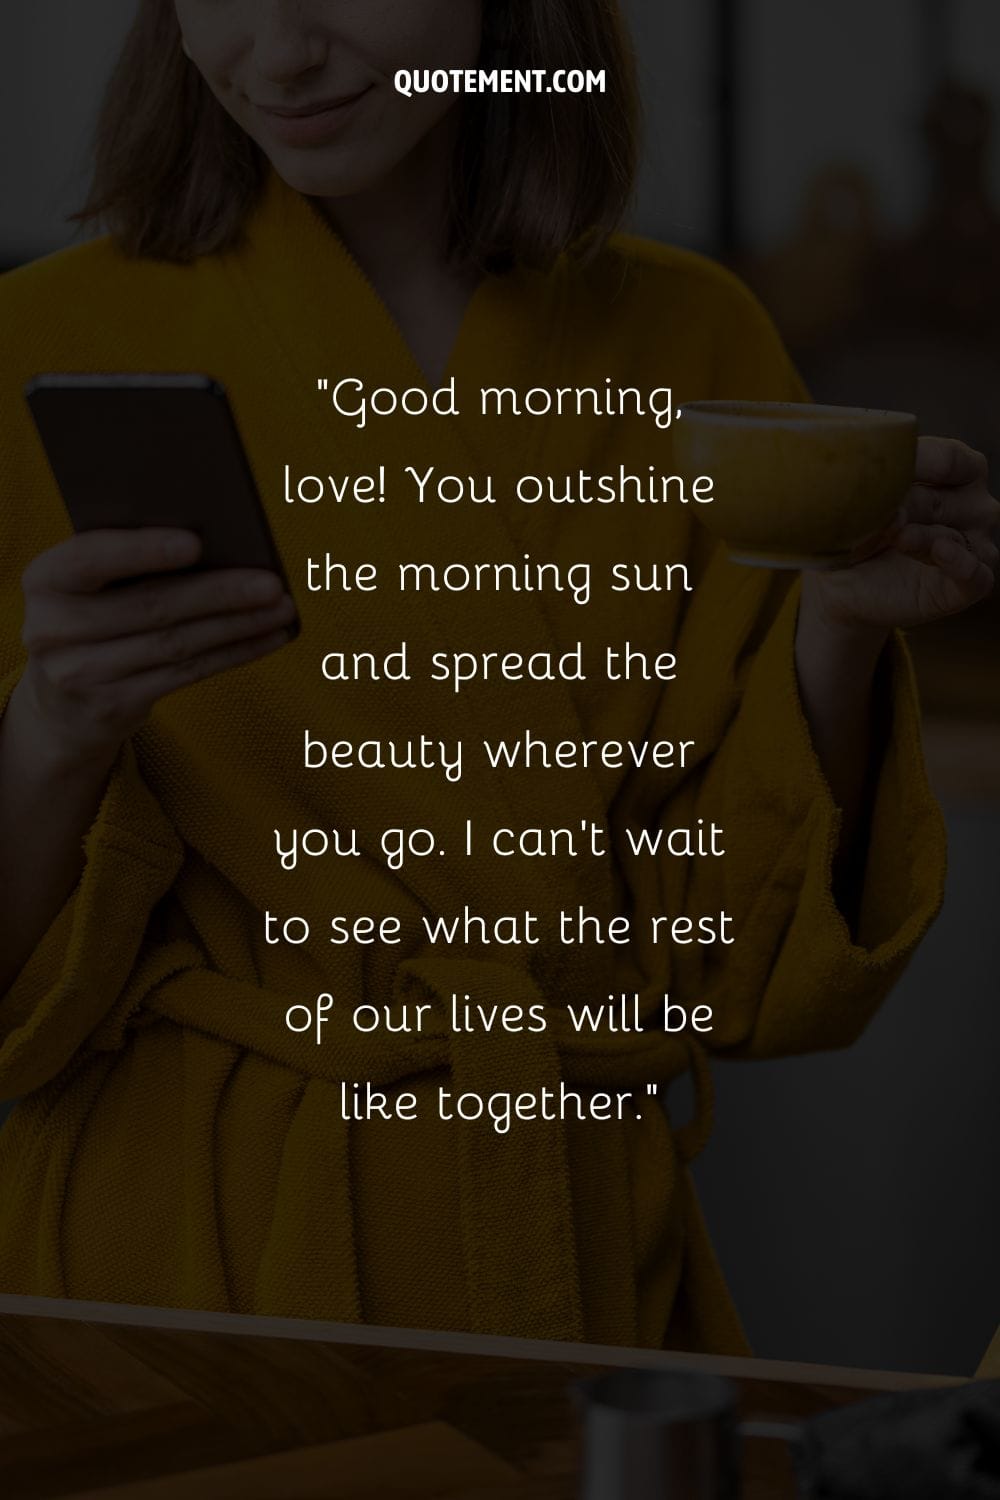 Good morning, love! You outshine the morning sun and spread the beauty wherever you go.